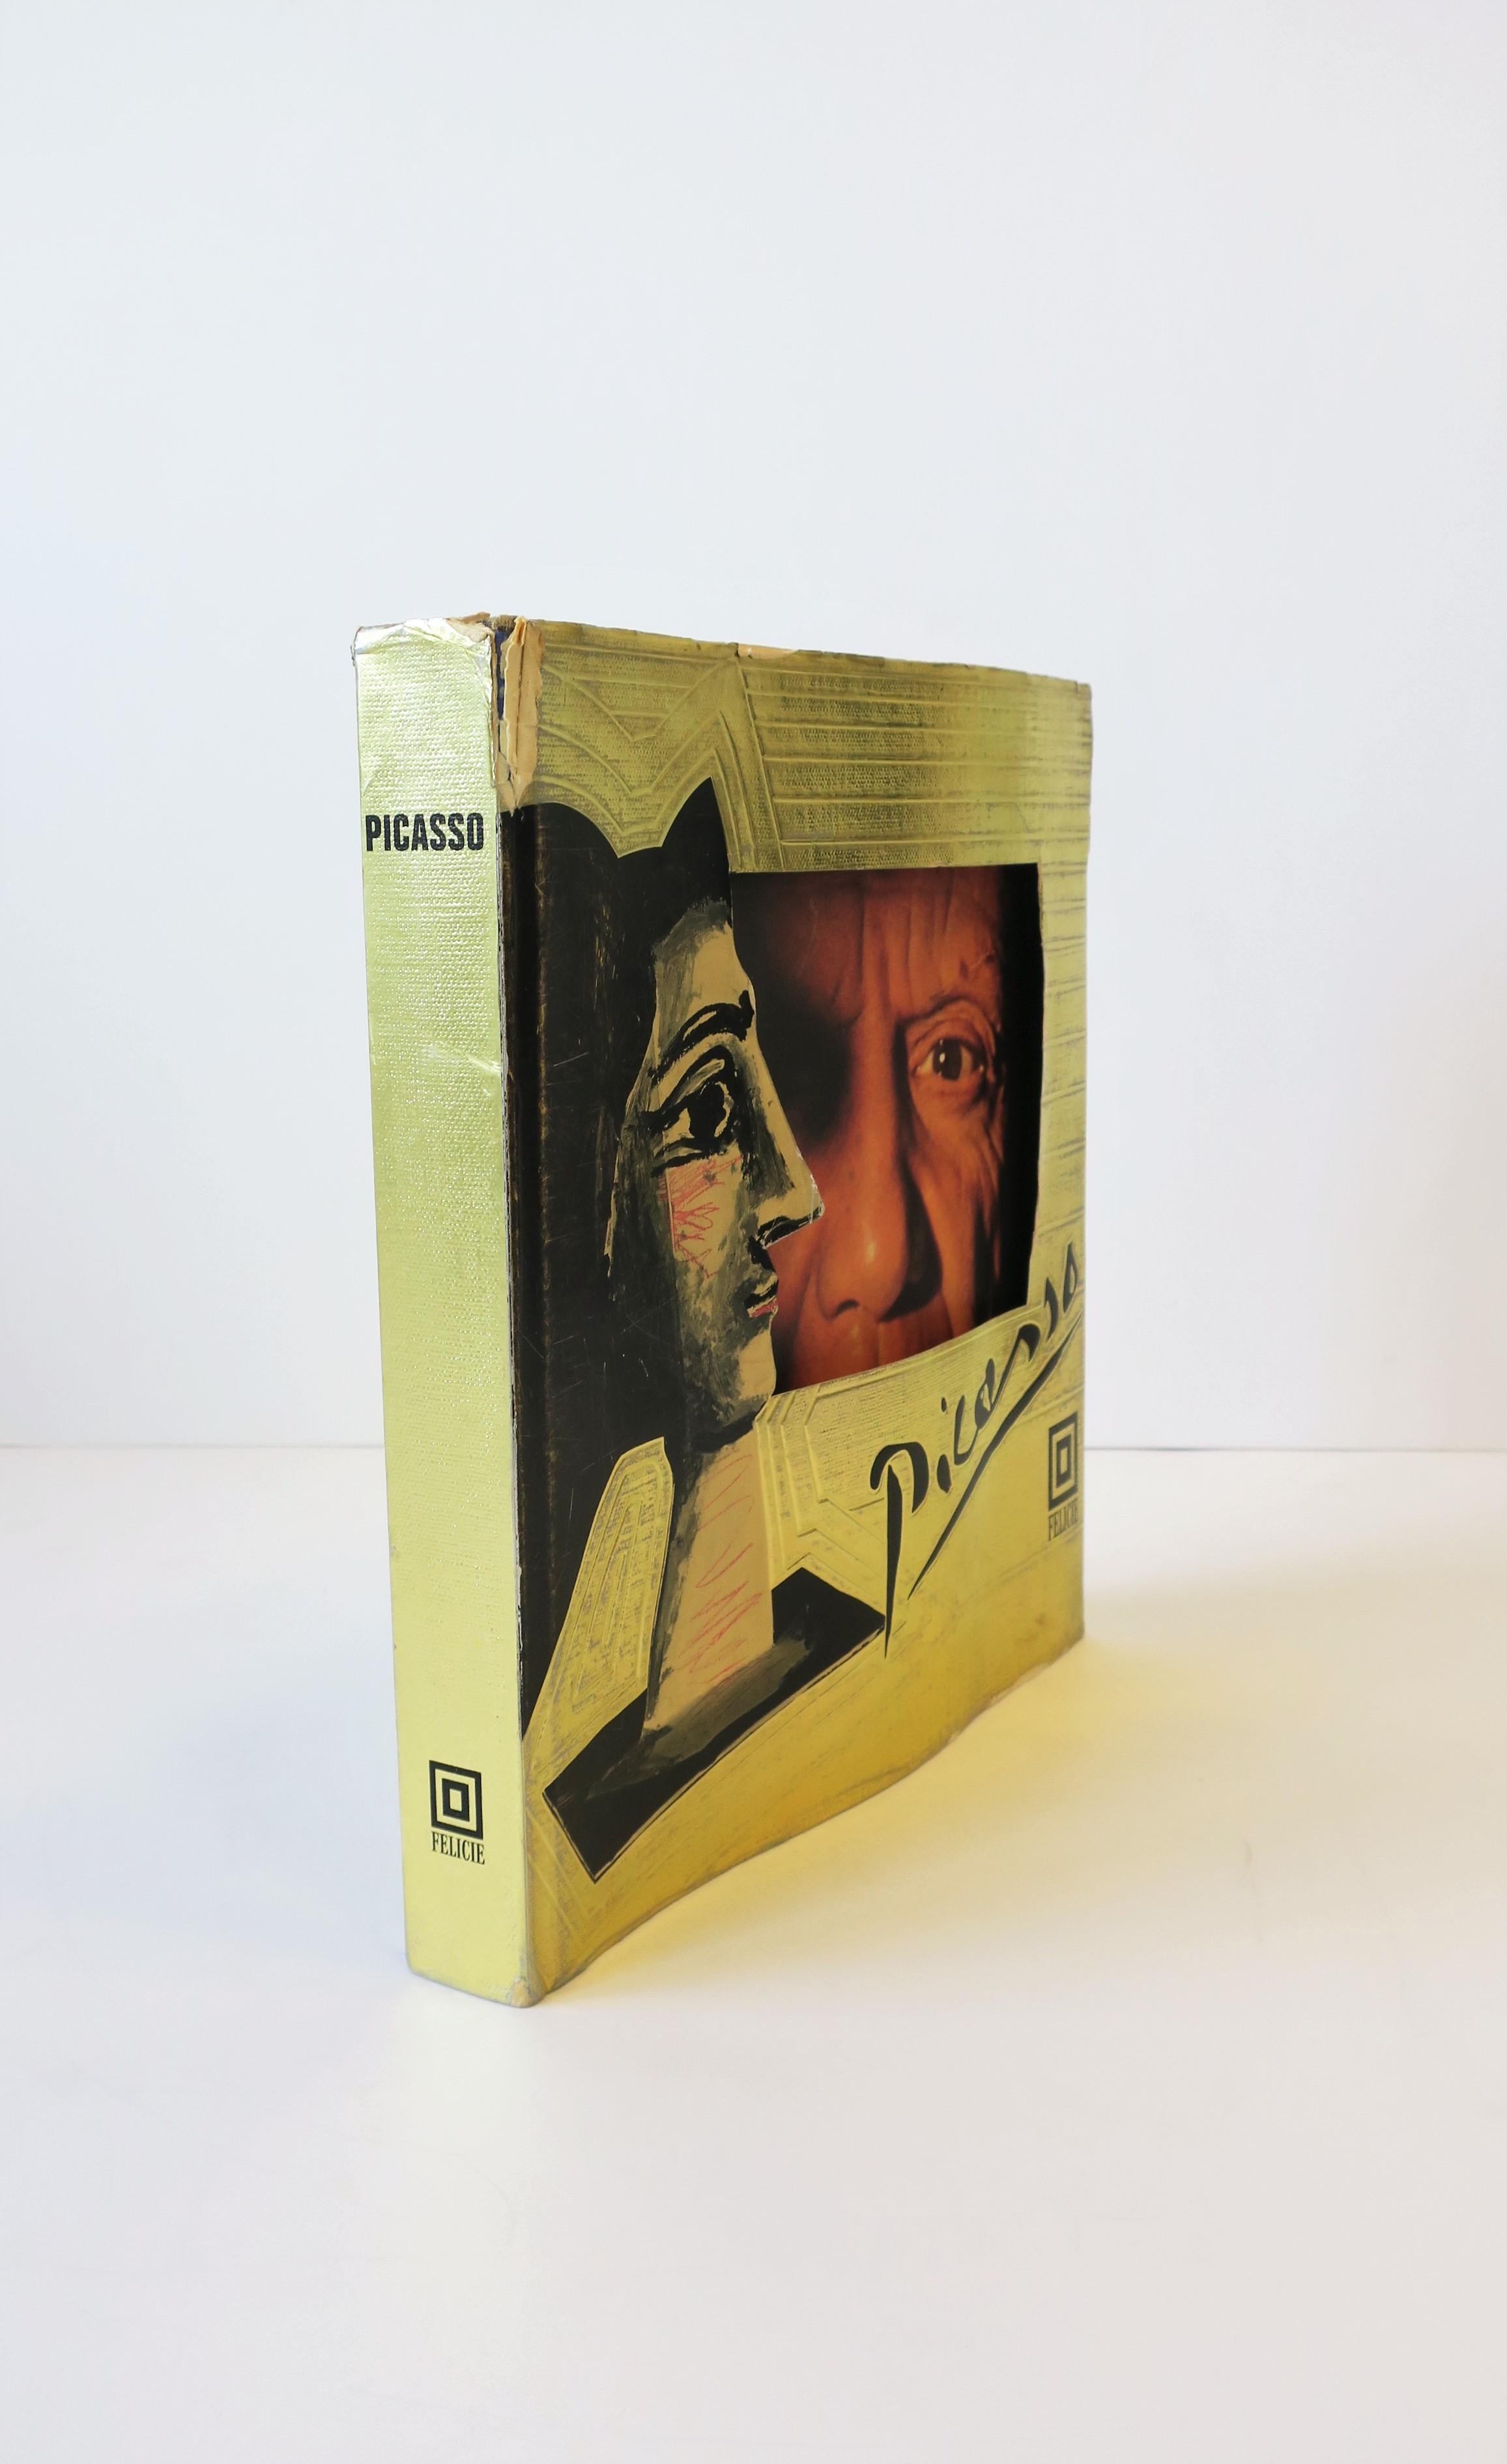 '70s Picasso Gold Art Coffee Table or Library Book 8